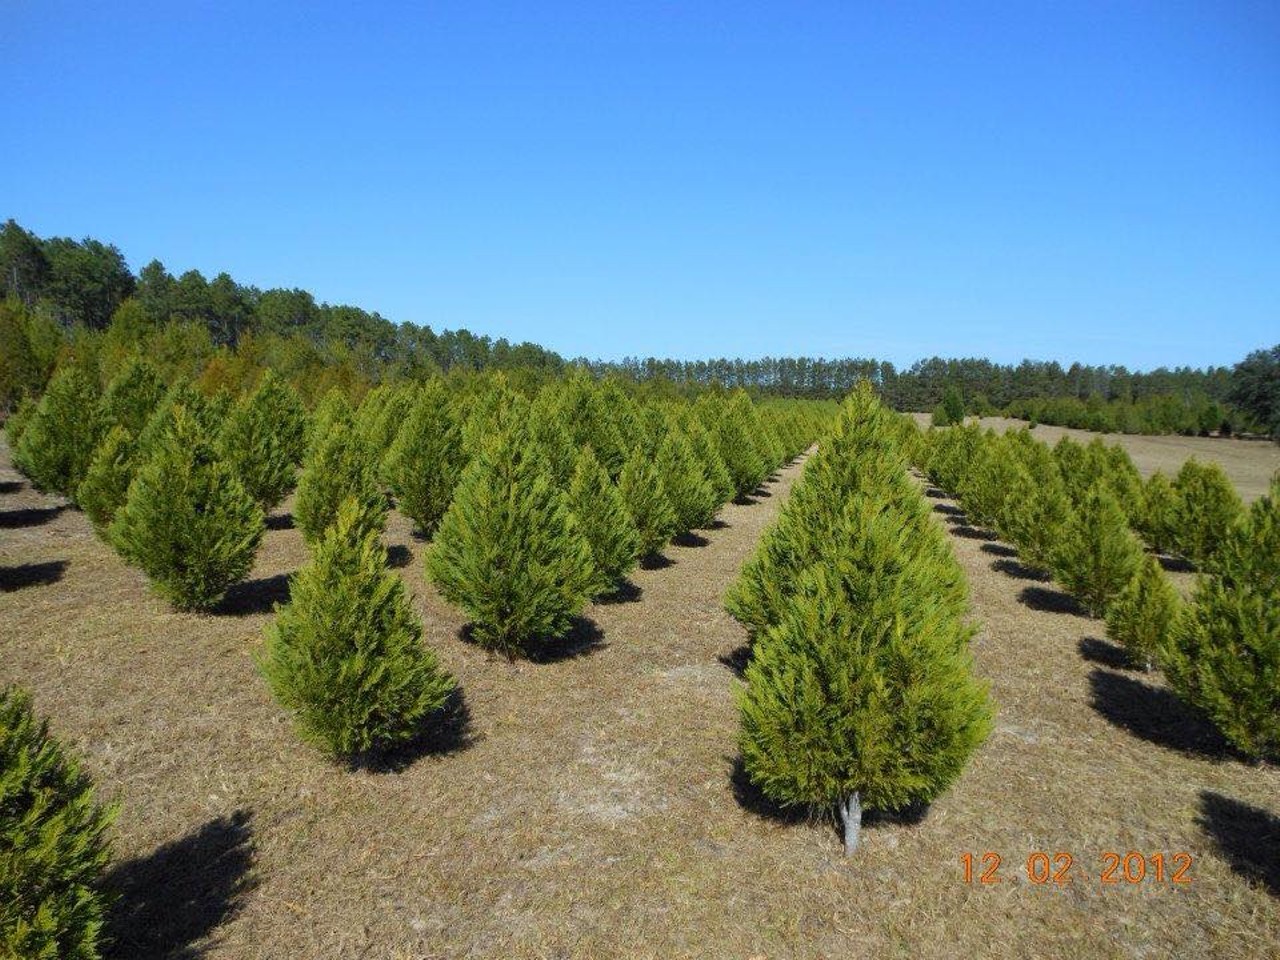 Strickland&#146;s Christmas Tree Farm
1602 Kidd Road, Defuniak Springs, FL 32433, 850-951-1005
Take a road trip with the fam and choose from Florida pines, Virginia pines, red cedars and more for your Christmas tree this year. This will be open until Dec. 22 and only cash and checks are accepted, so there&#146;s no need for plastic.
Photo via Strickland&#146;s Christmas Tree Farms/Facebook